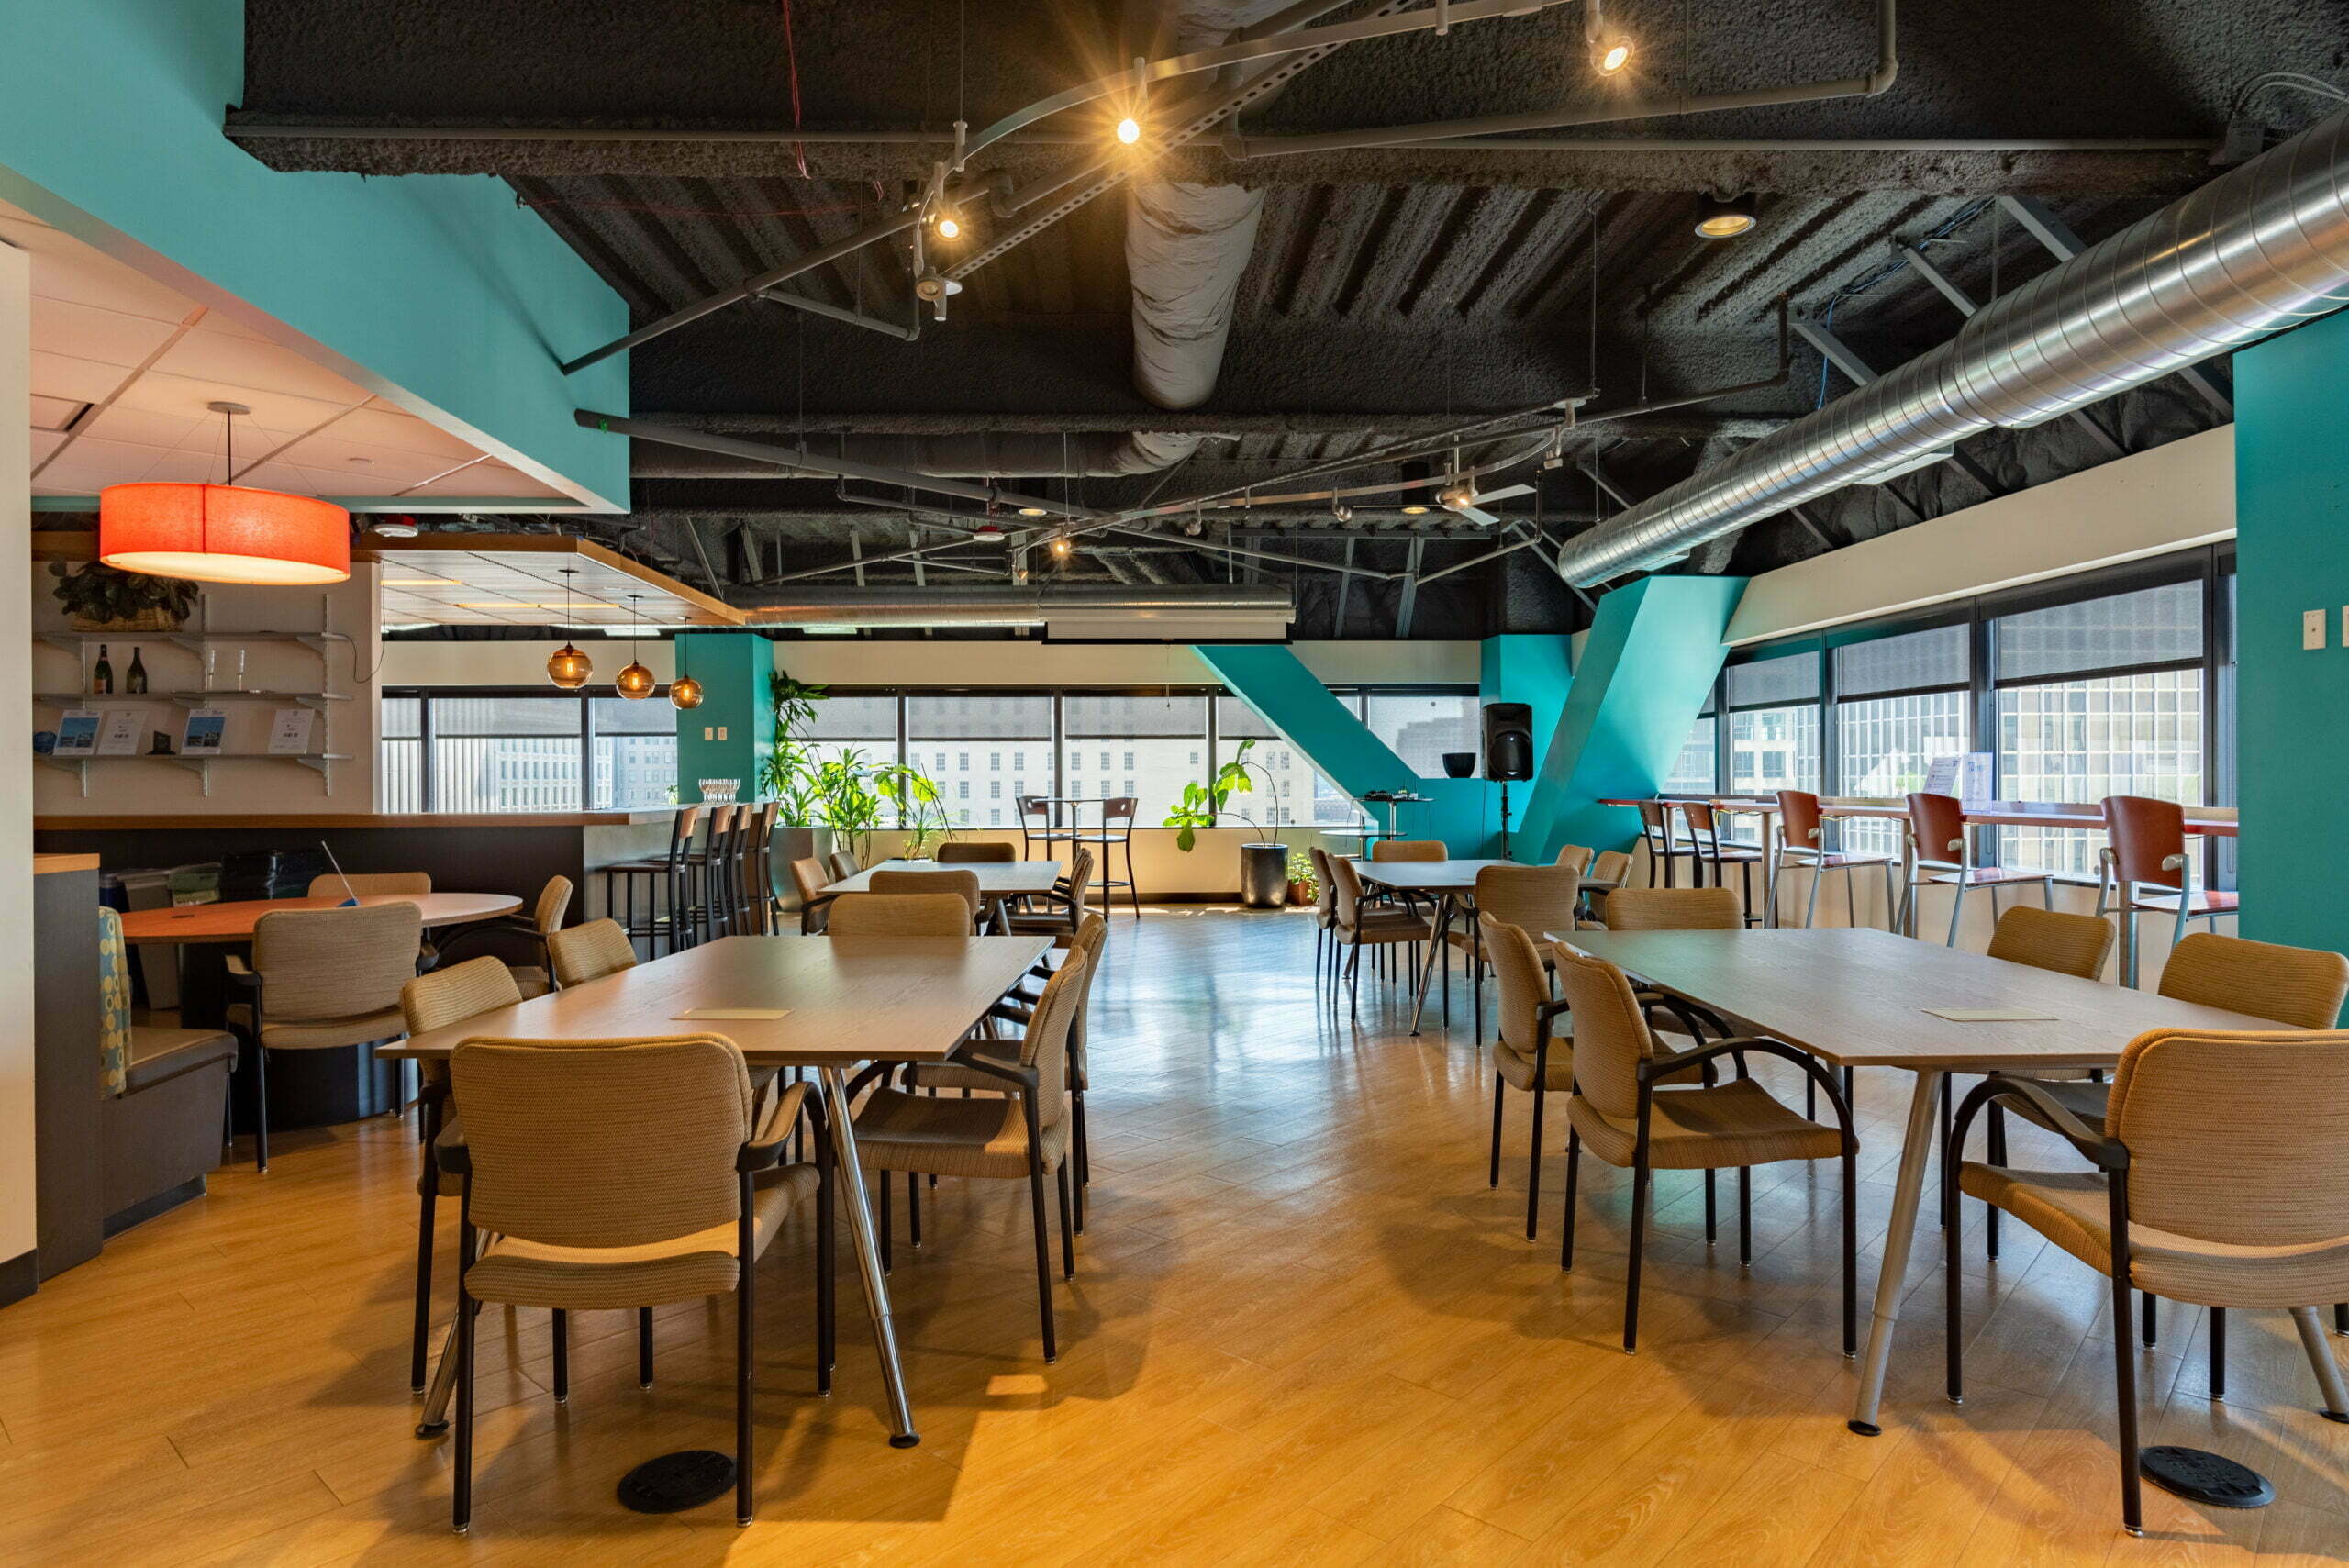 Cafe event space for corporate, presentations, conferences, fundraisers at SURF Incubator In Seattle WA